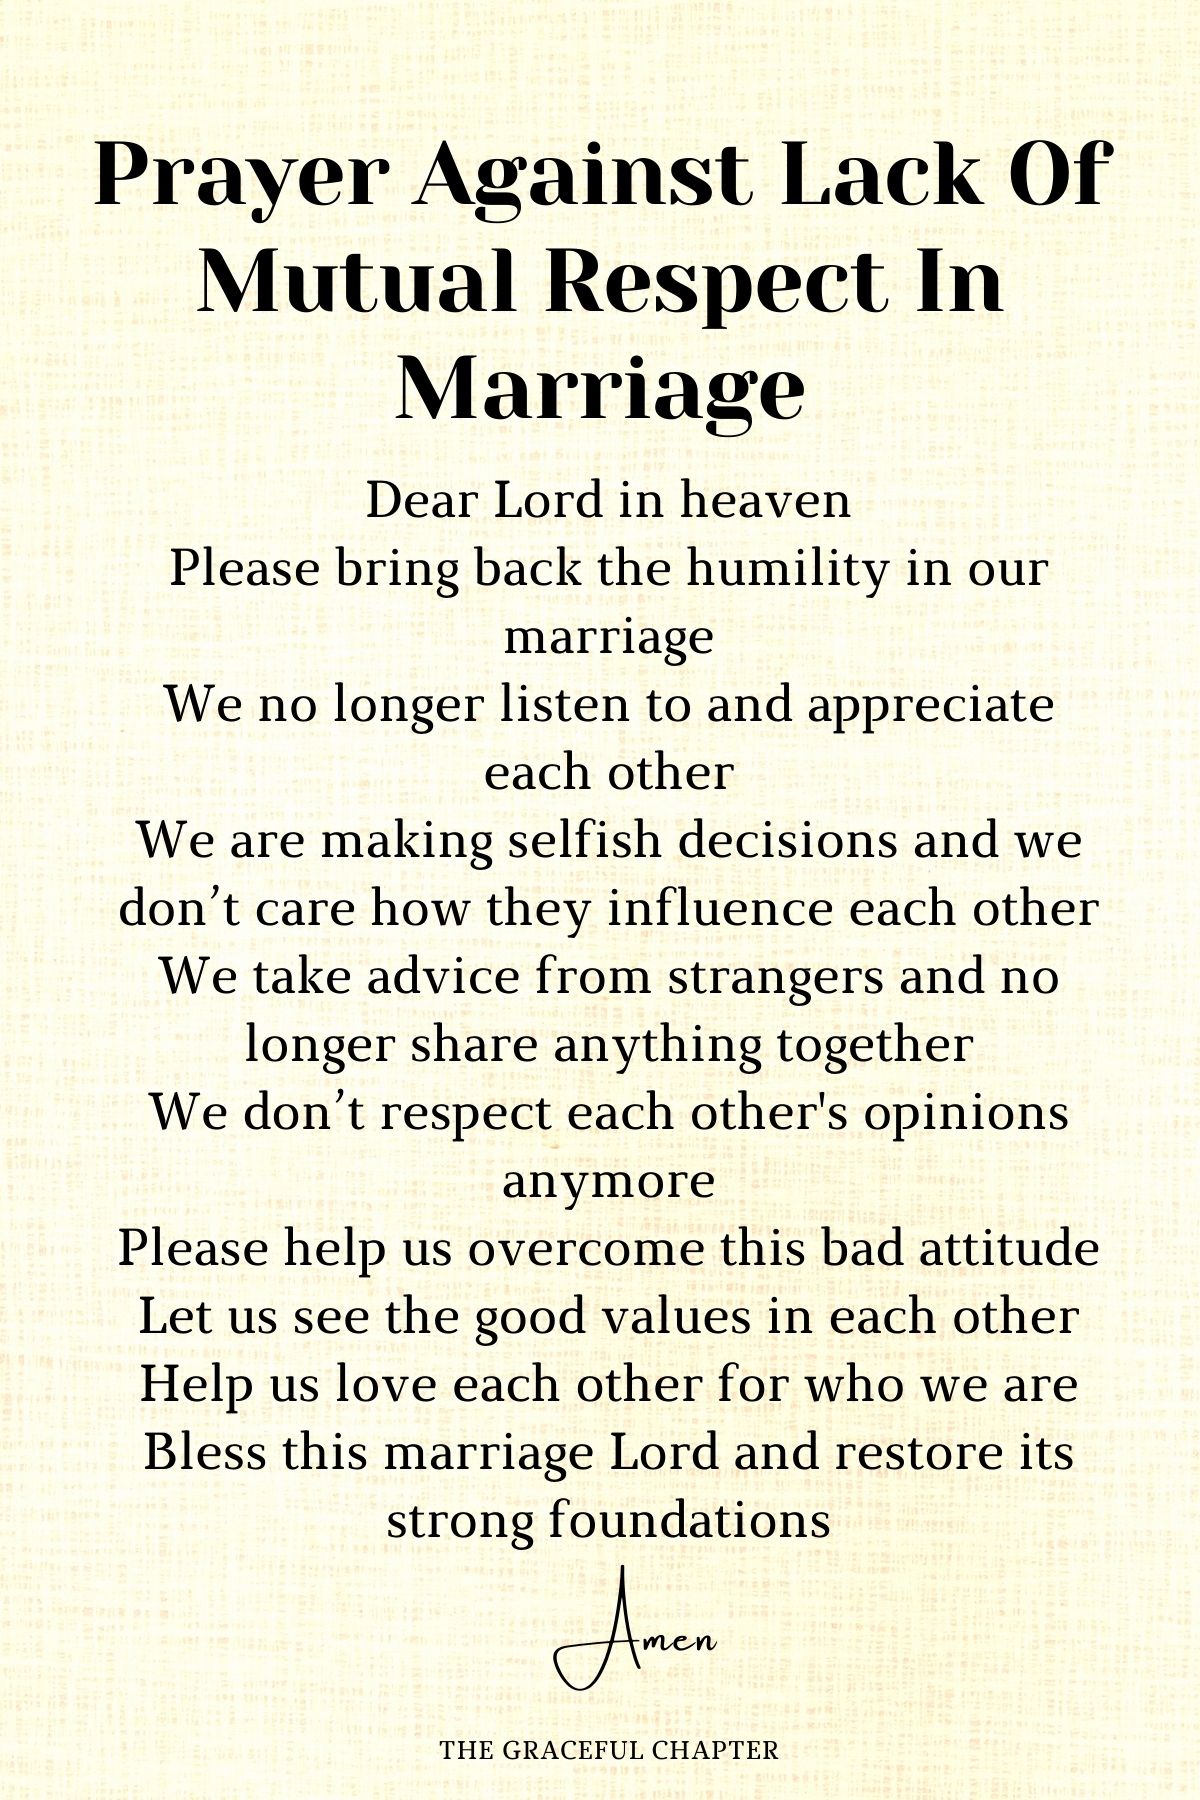 Prayer against lack of mutual respect in marriage